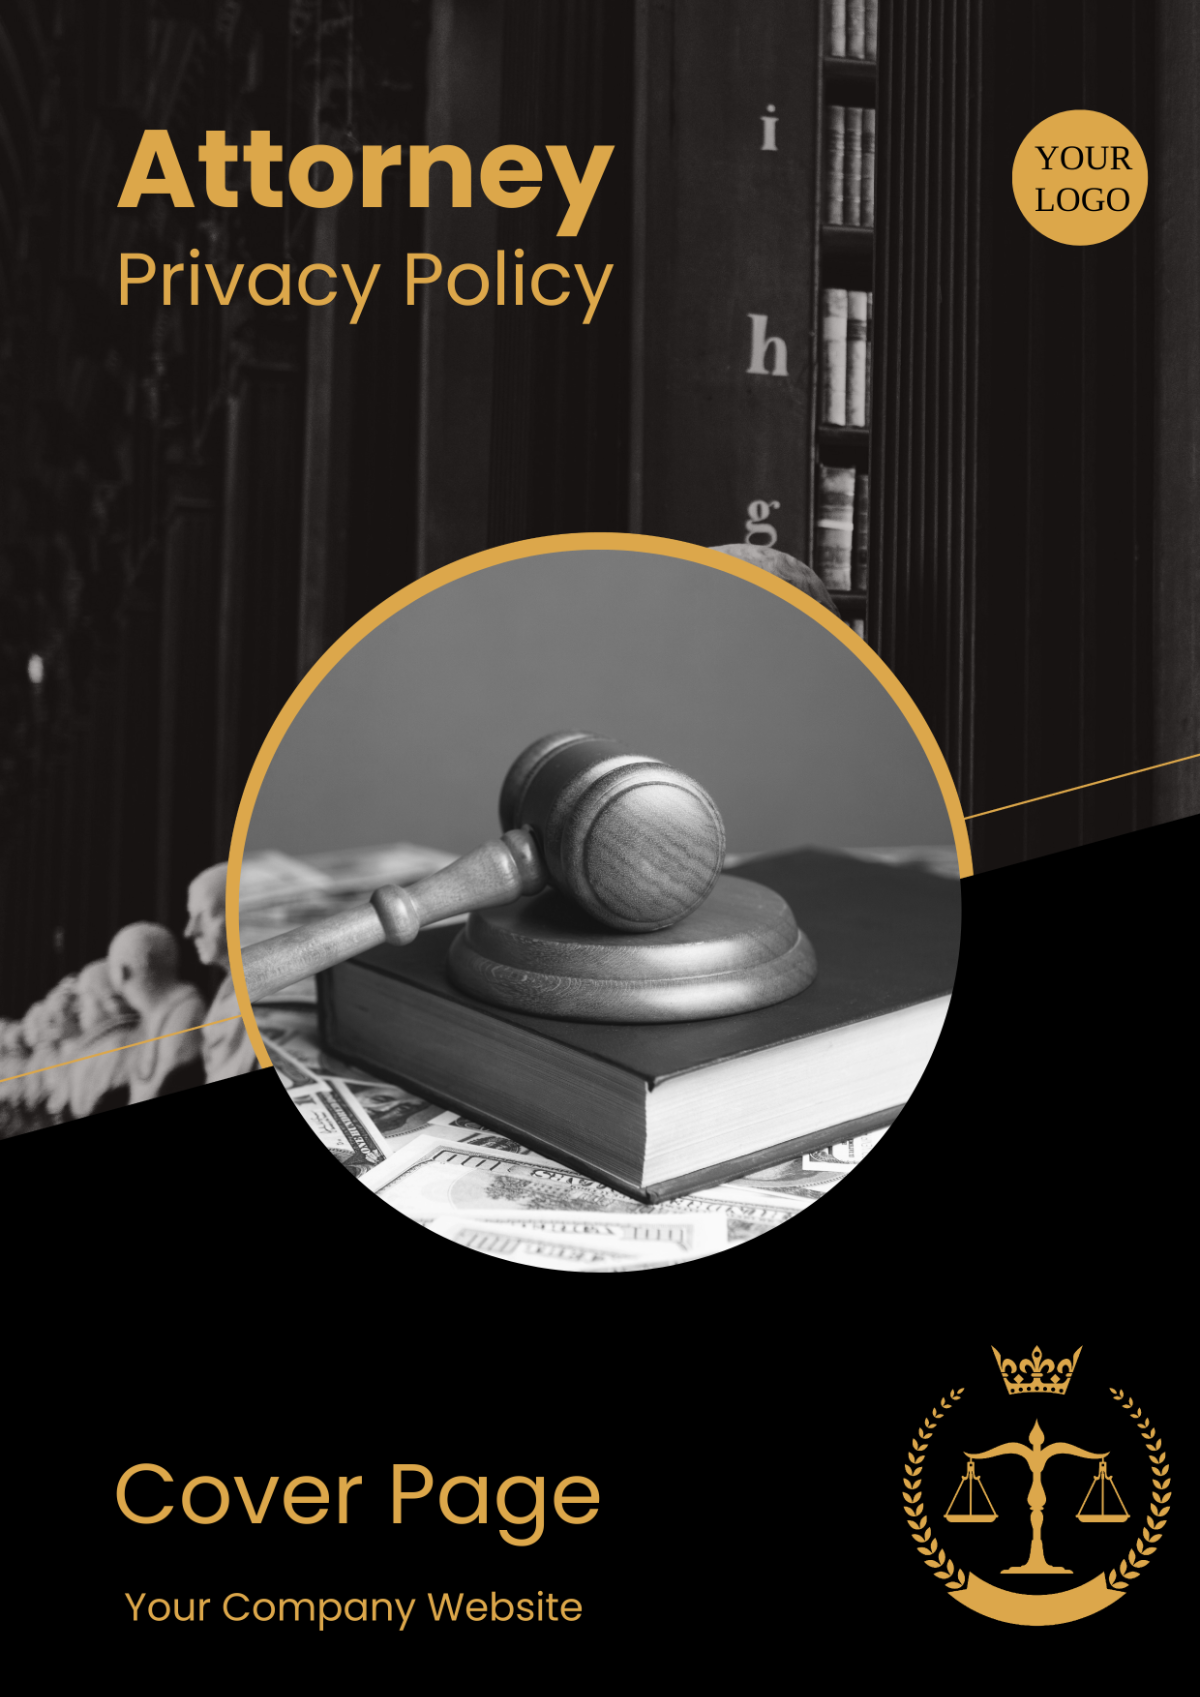 Attorney Privacy Policy Cover Page